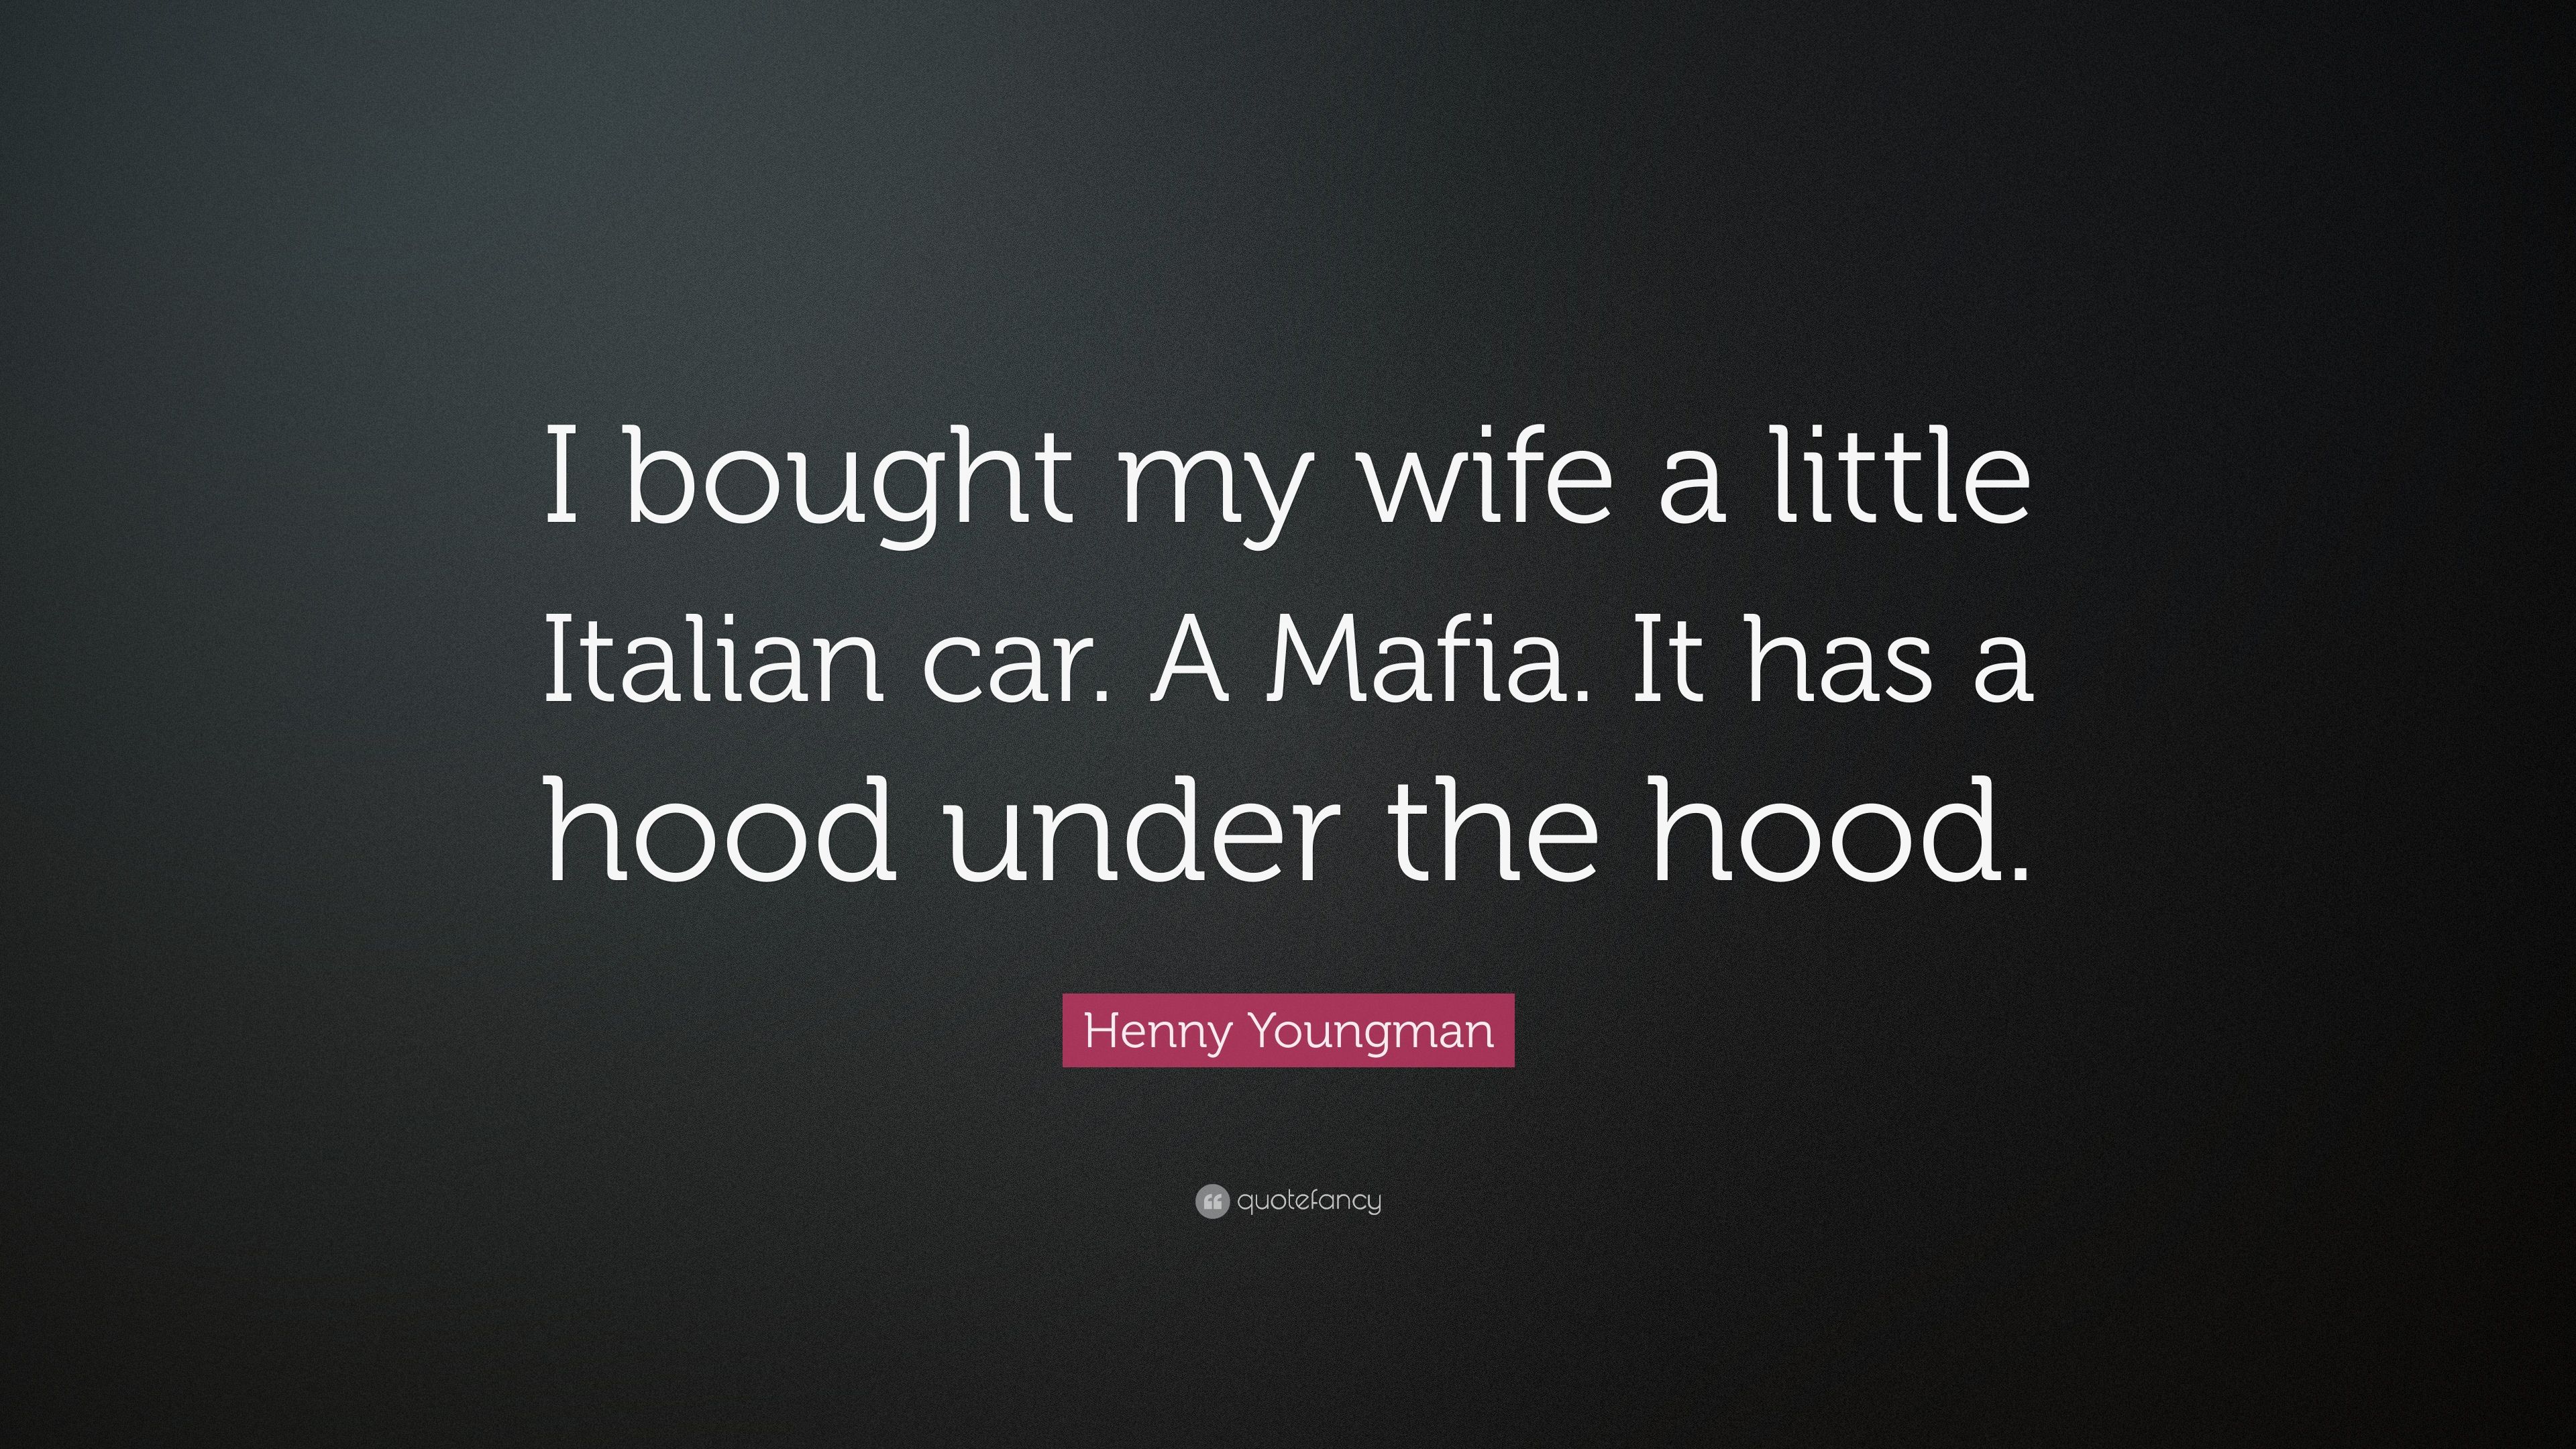 Henny Youngman Quote: “I bought my wife a little Italian car. A